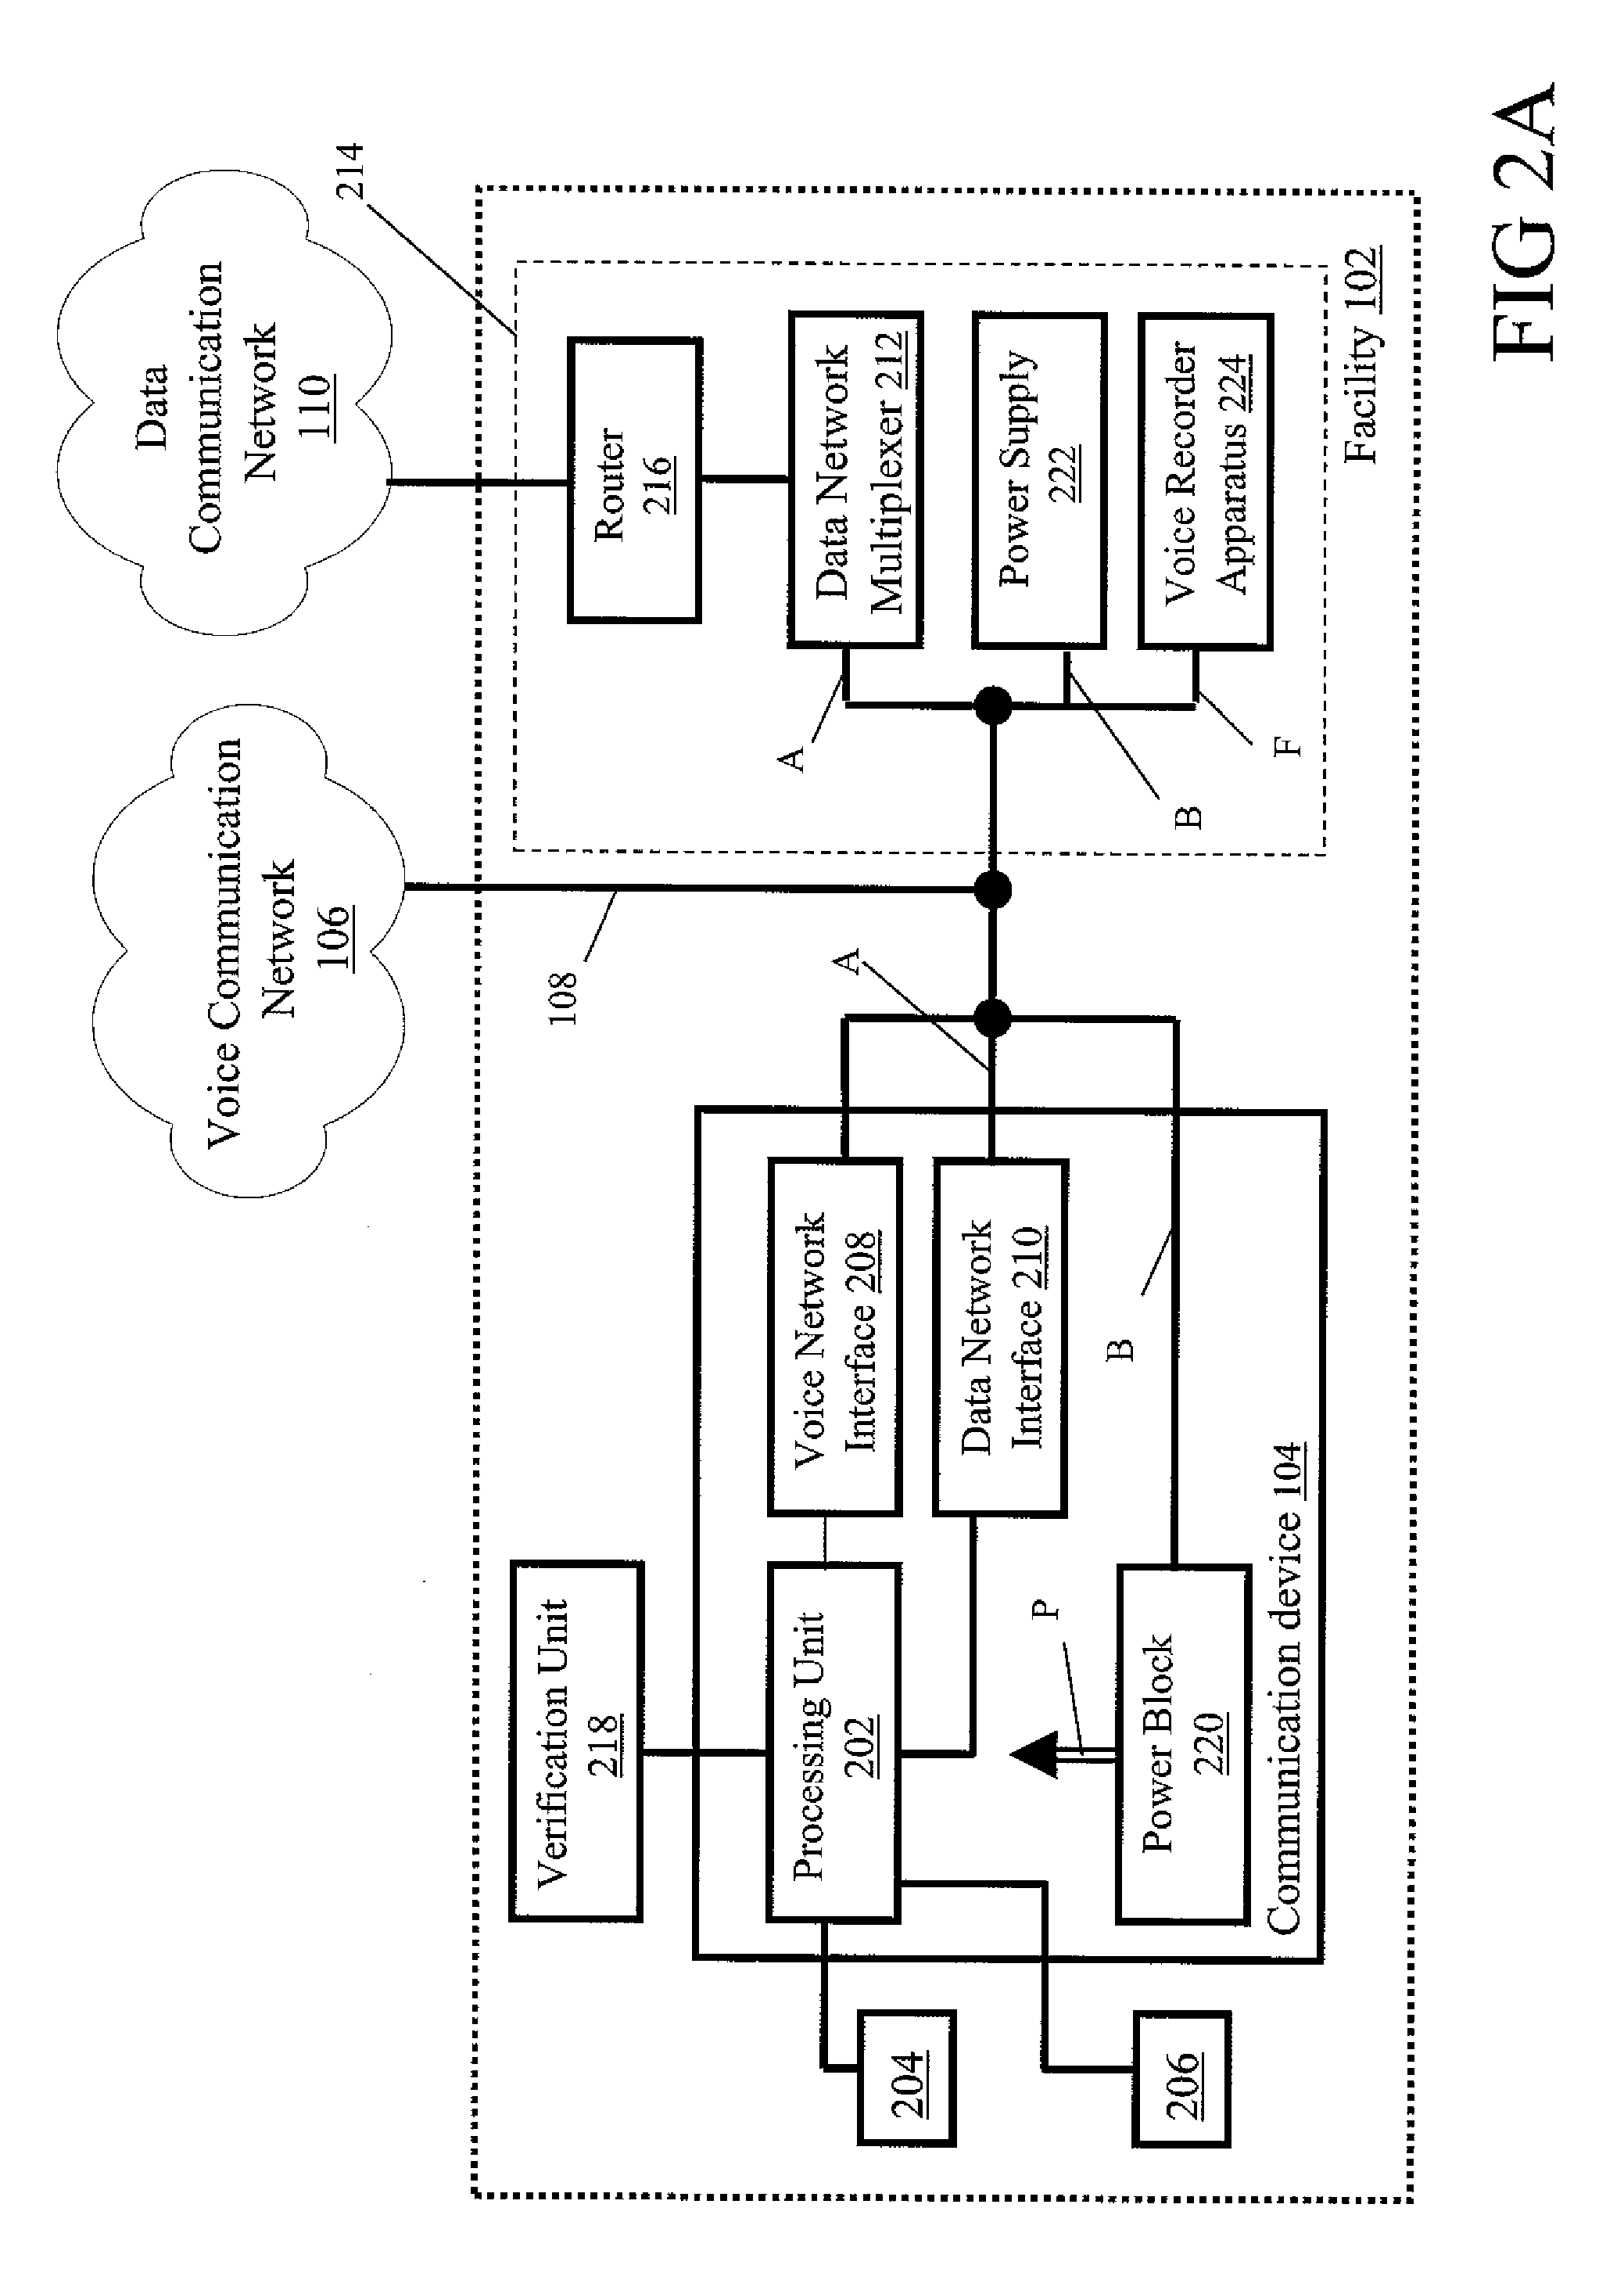 Method, system and apparatus for communicating data associated with a user of a voice communication device